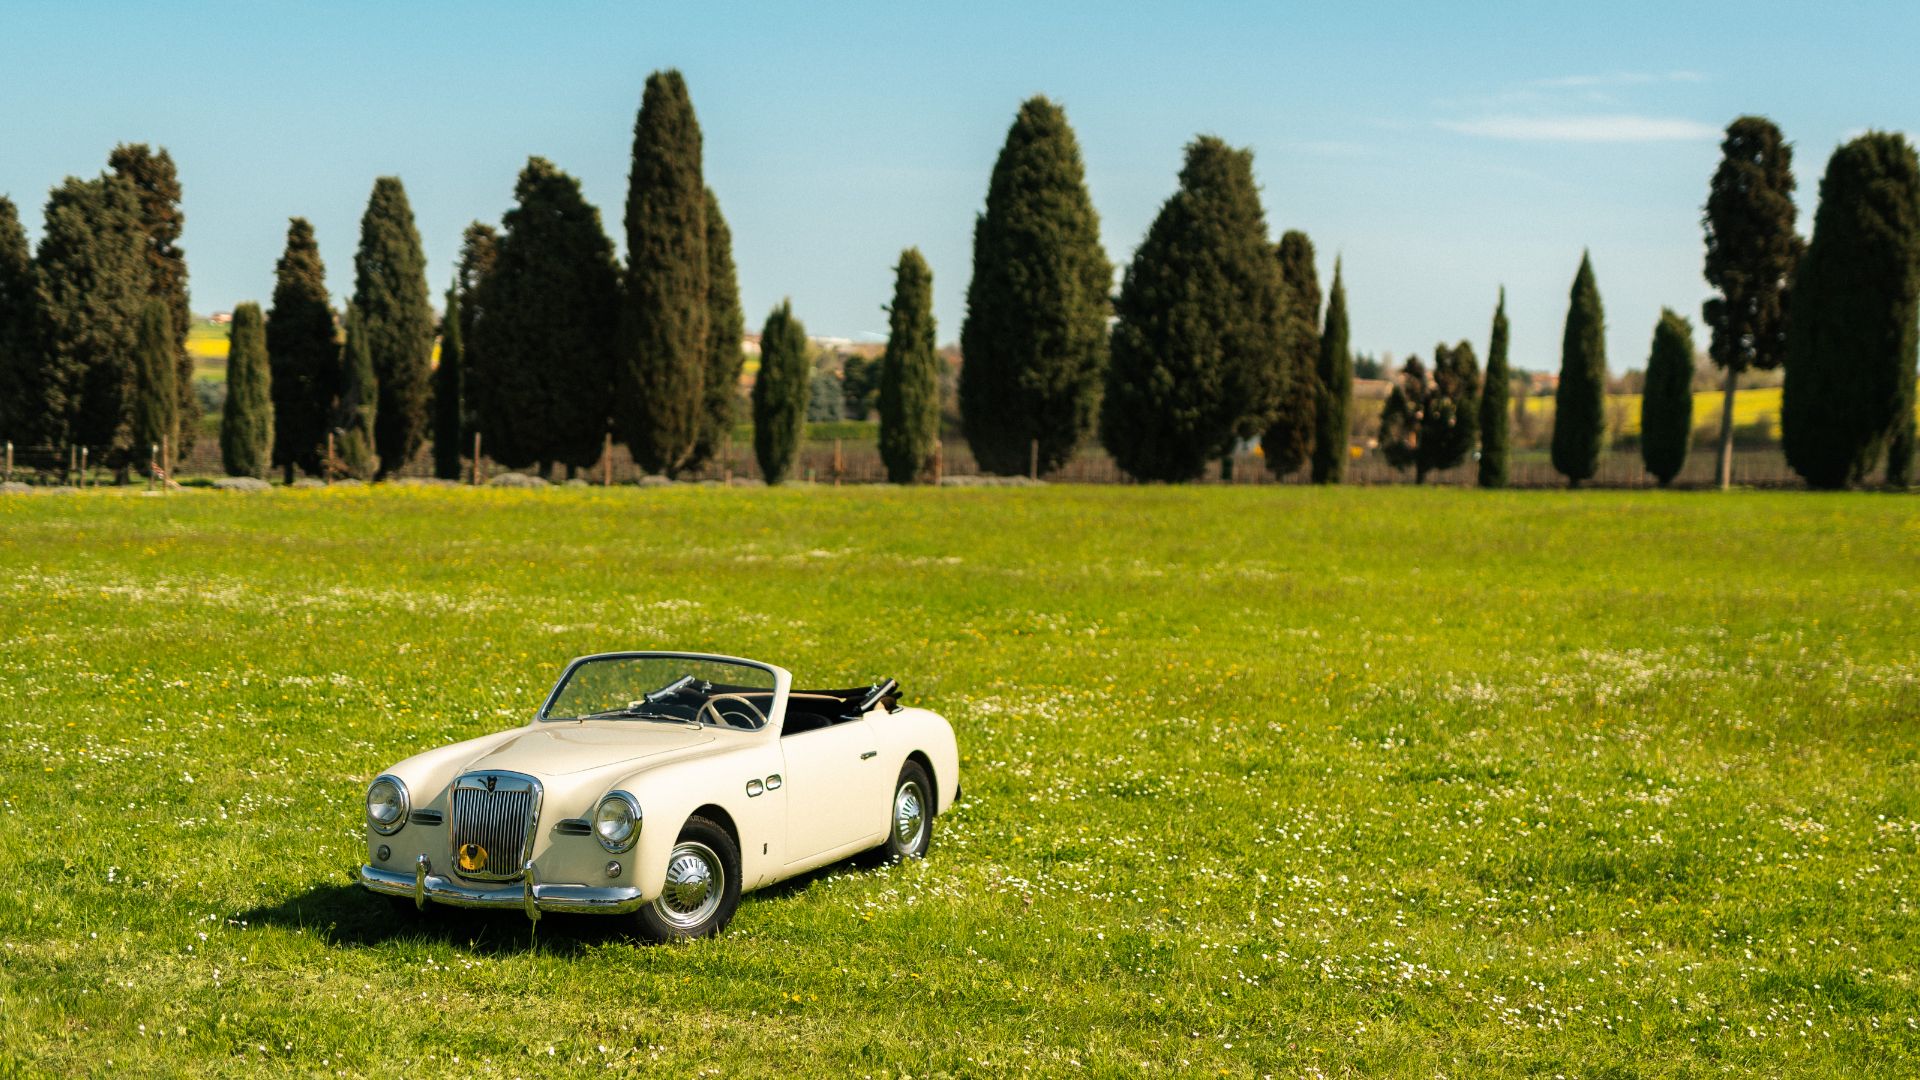 The Classics Forum: from 31 May to 2 June comes the event dedicated to the world of classic cars